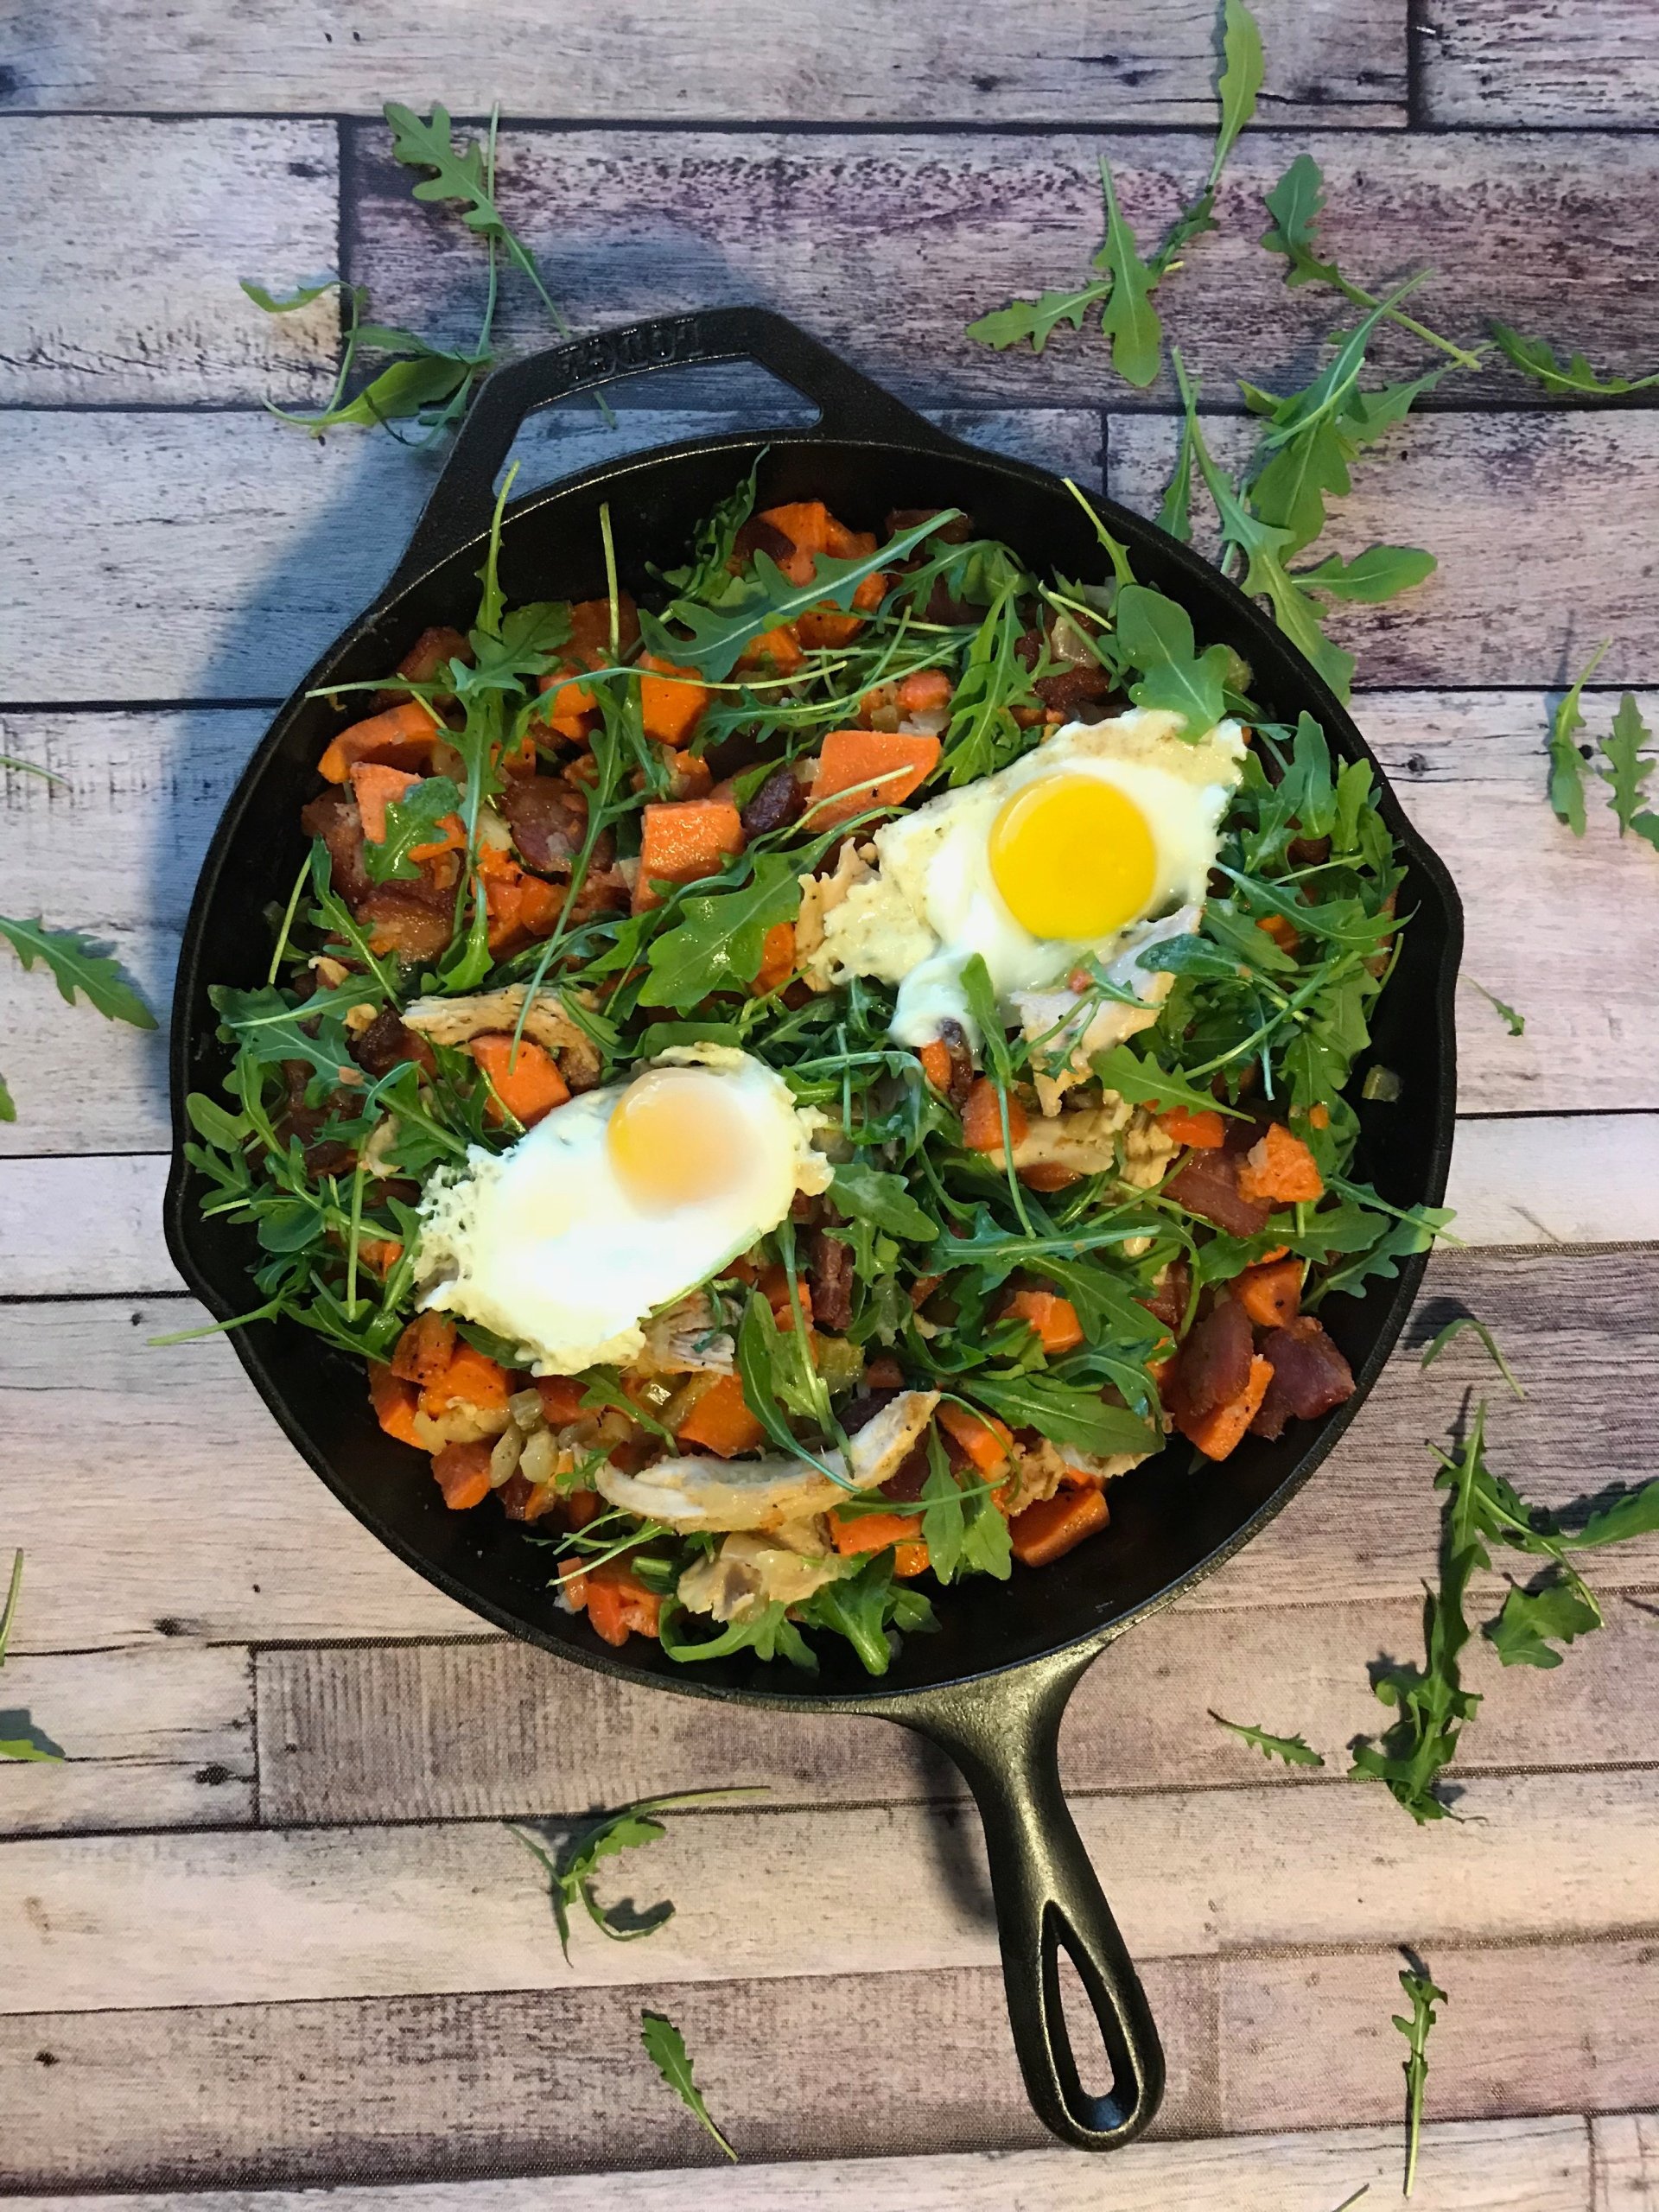 Braised Rabbit Hash with Bacon and Arugula